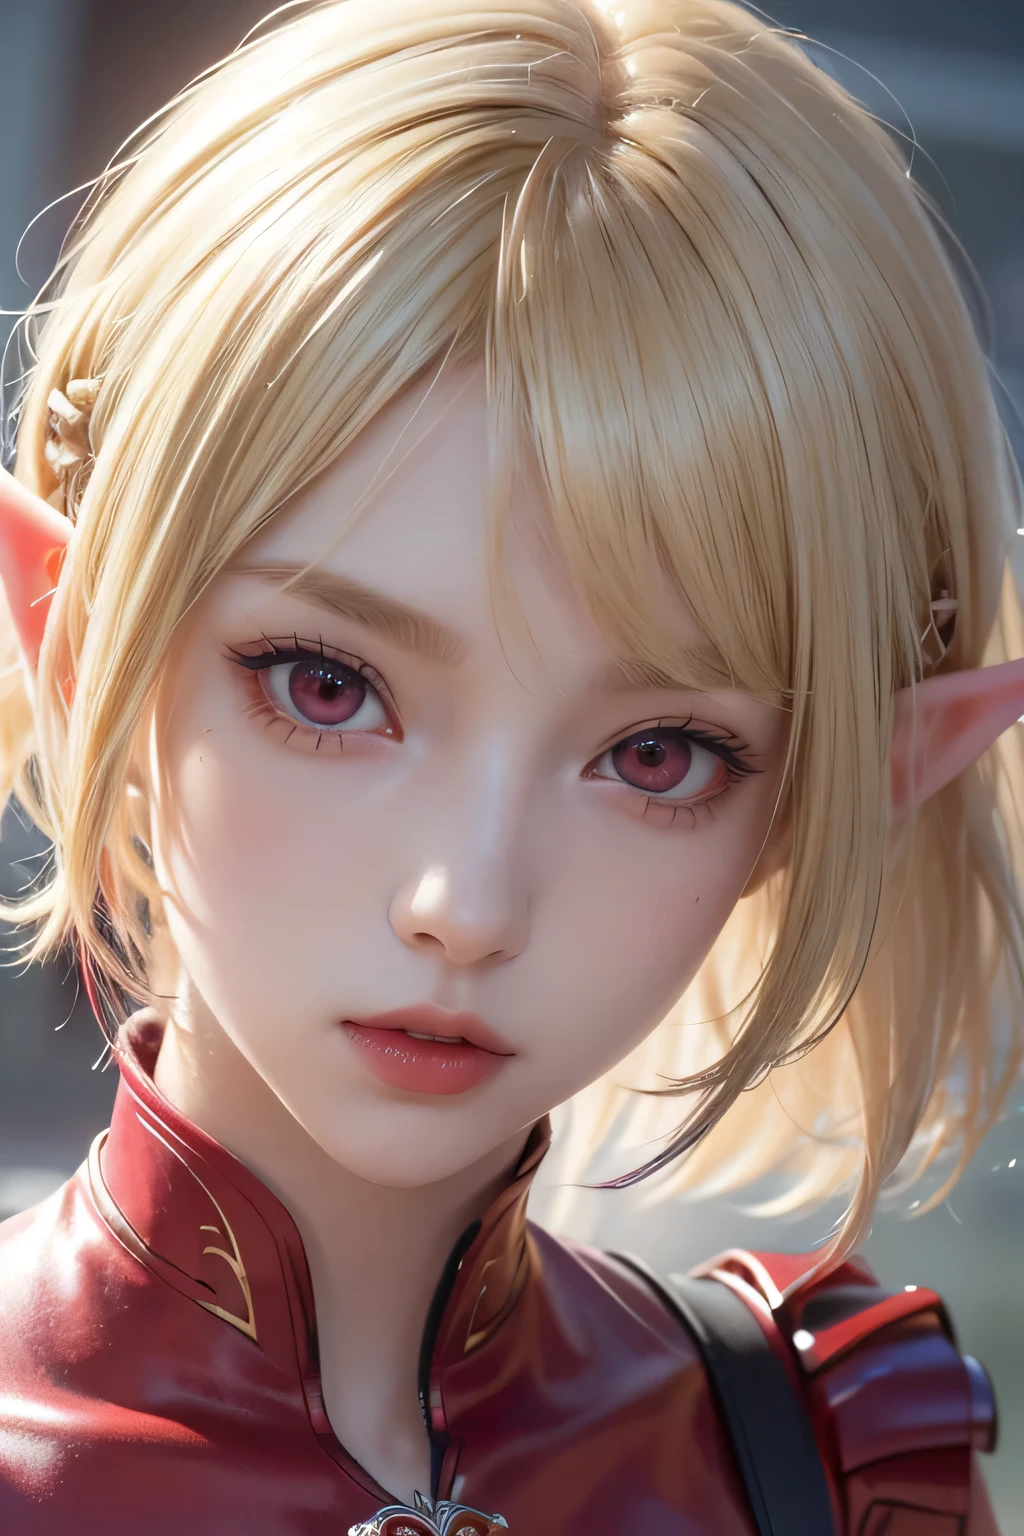 absurdres, (8k, RAW photo, best quality), masterpiece, hyper detailed, perfection, best quality, photo-realistic, (((1girl:1.2))), (((blond girl))), (((solo:1.2))), elf, elf ears, (((blond shortcut hair))), (((burgundy ends of hair))), (((watery scarlet red eyes))), (slanted red eyes, tsurime), blond eyebrows, (hair ornament), (portrait:1.34), face shot, full-length:1.5, (((fashion model pose))), at schoolyard, daylight, amazing shadow, close-up, ((red watery eyes)), (((face close-up))):1.4, hair ornament, black battle suit